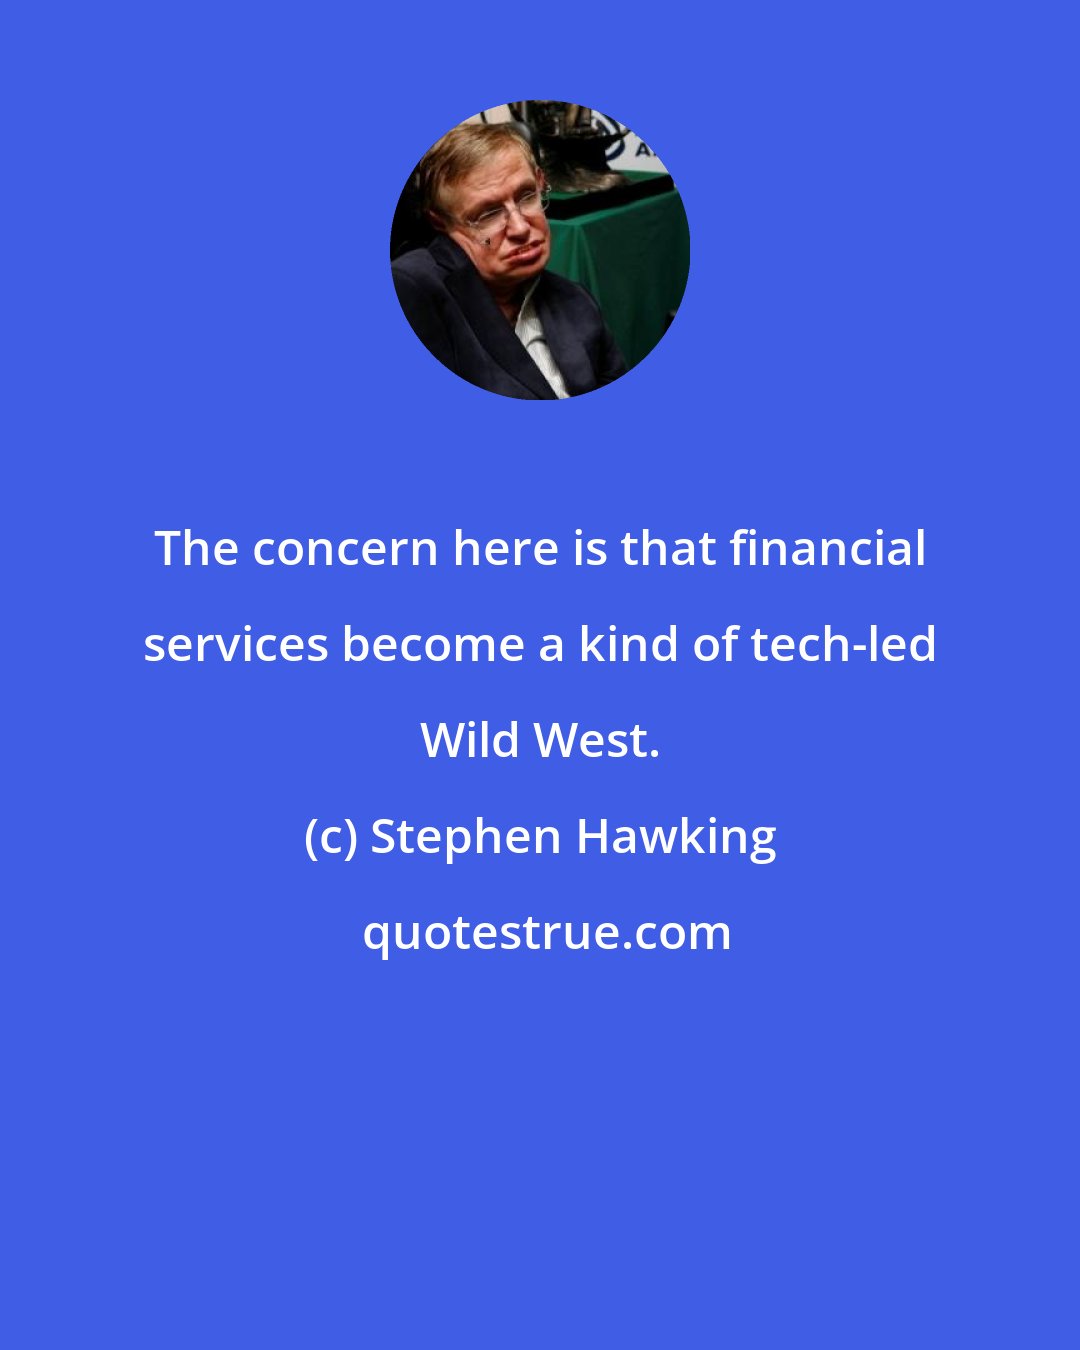 Stephen Hawking: The concern here is that financial services become a kind of tech-led Wild West.